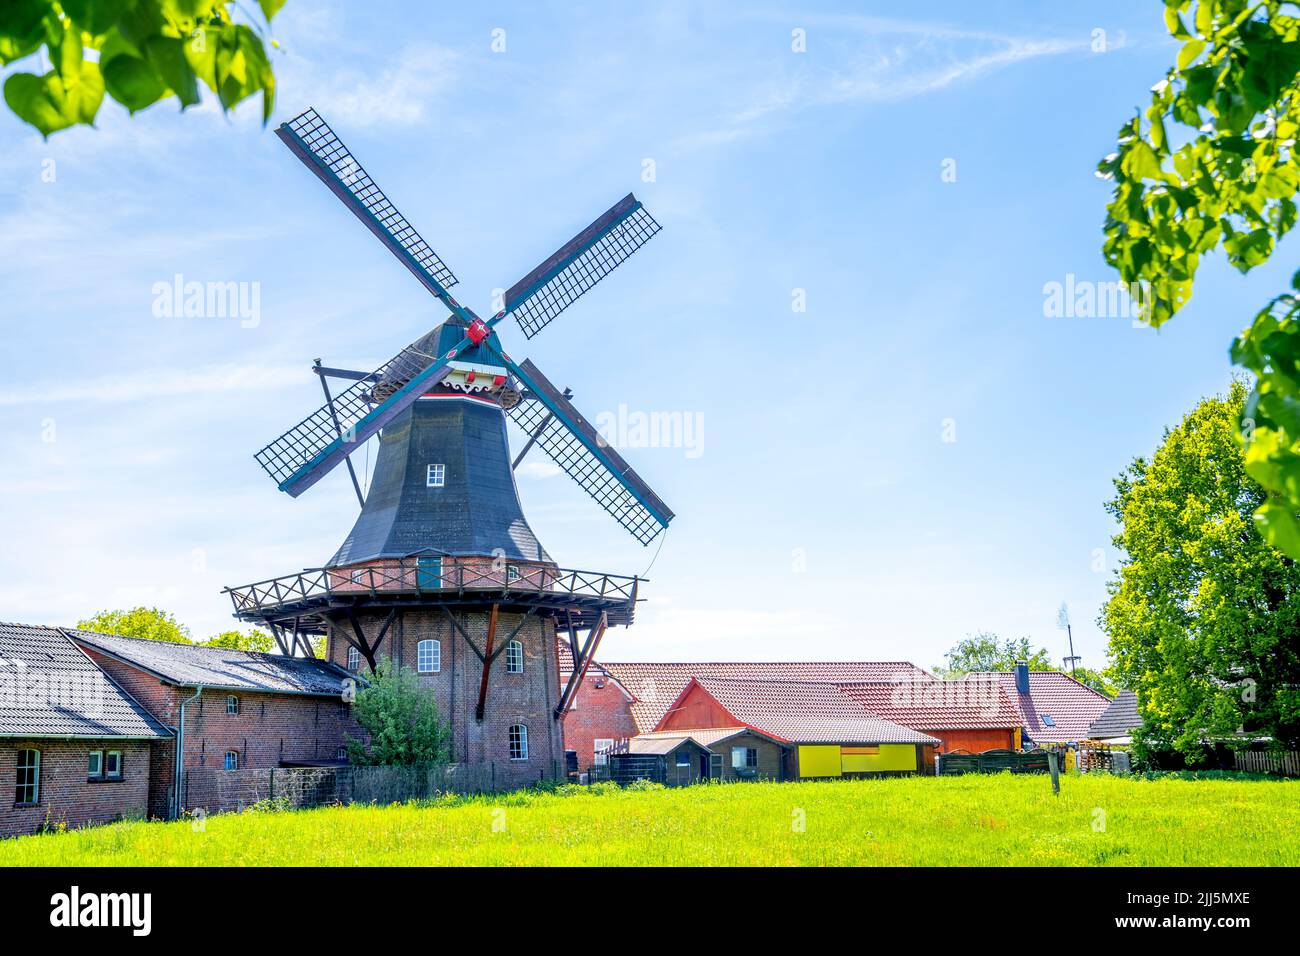 Germany, Lover Saxony, Aurich, Traditional windmill and adjacent houses in summer Stock Photo